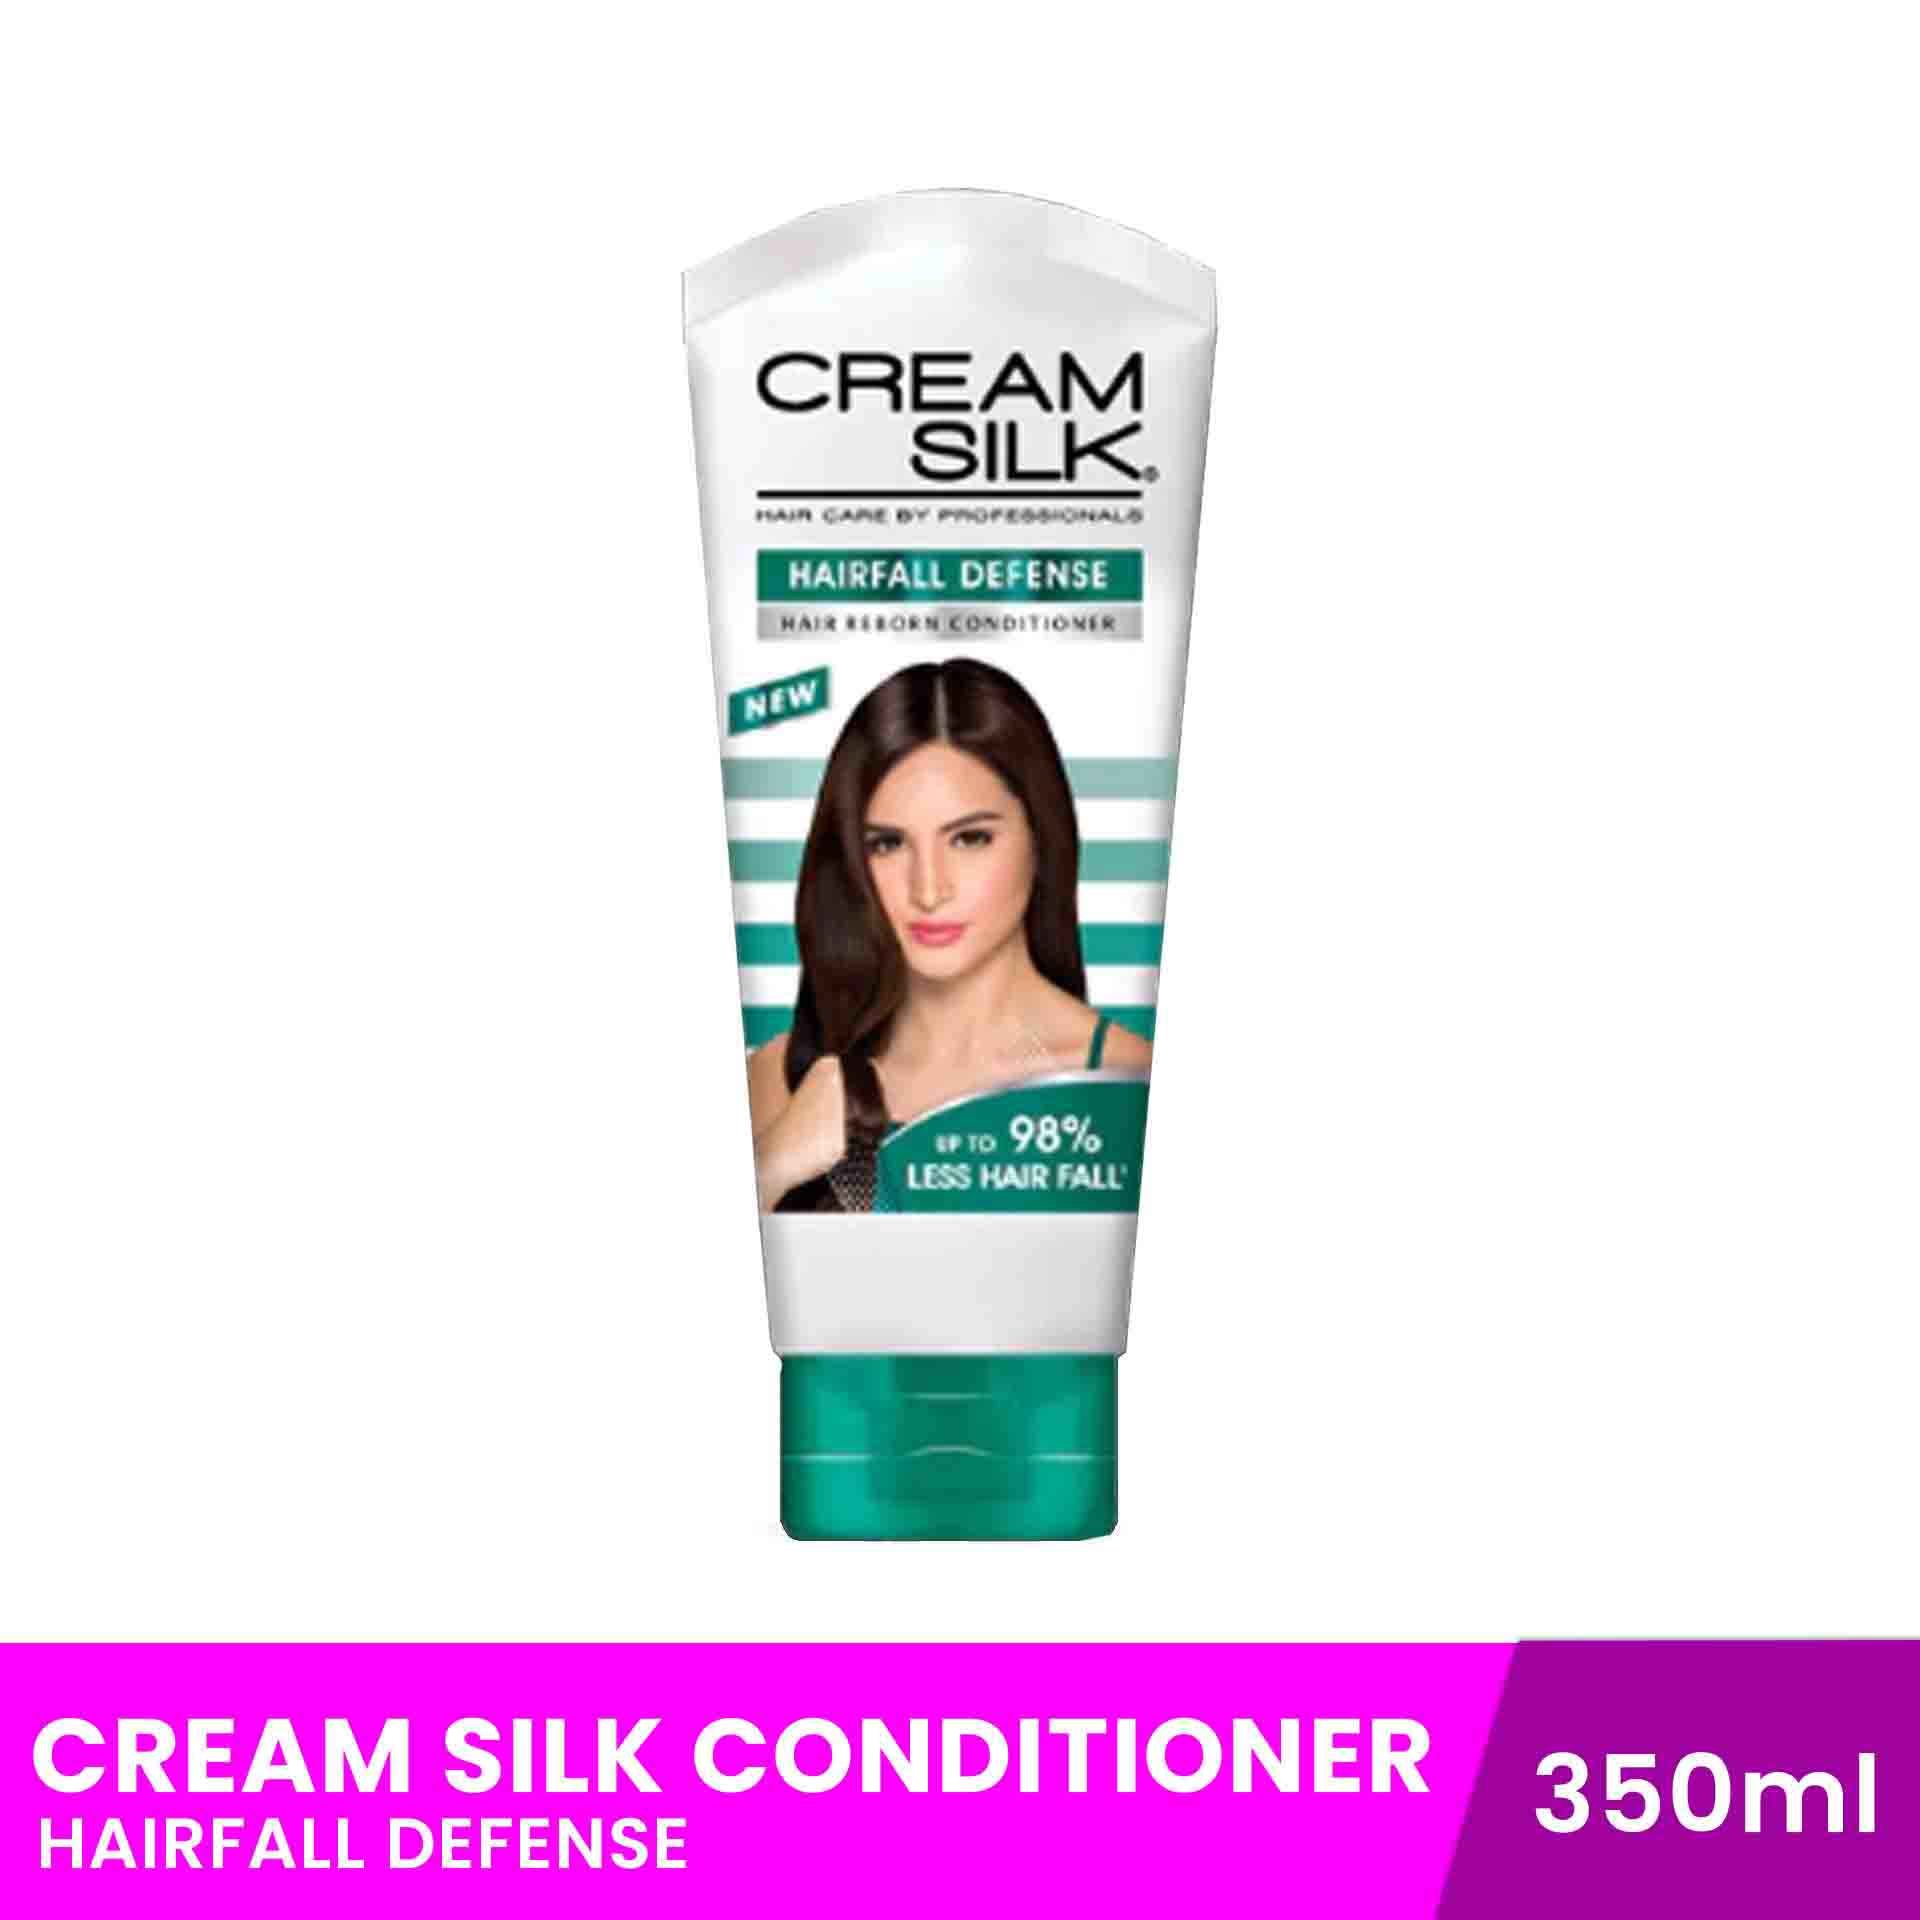 CREAM SILK Conditioner Hair Fall Defense 350ml, hair care, personal care,  shampoo partner for men and women, grocery item, unilever | Lazada PH